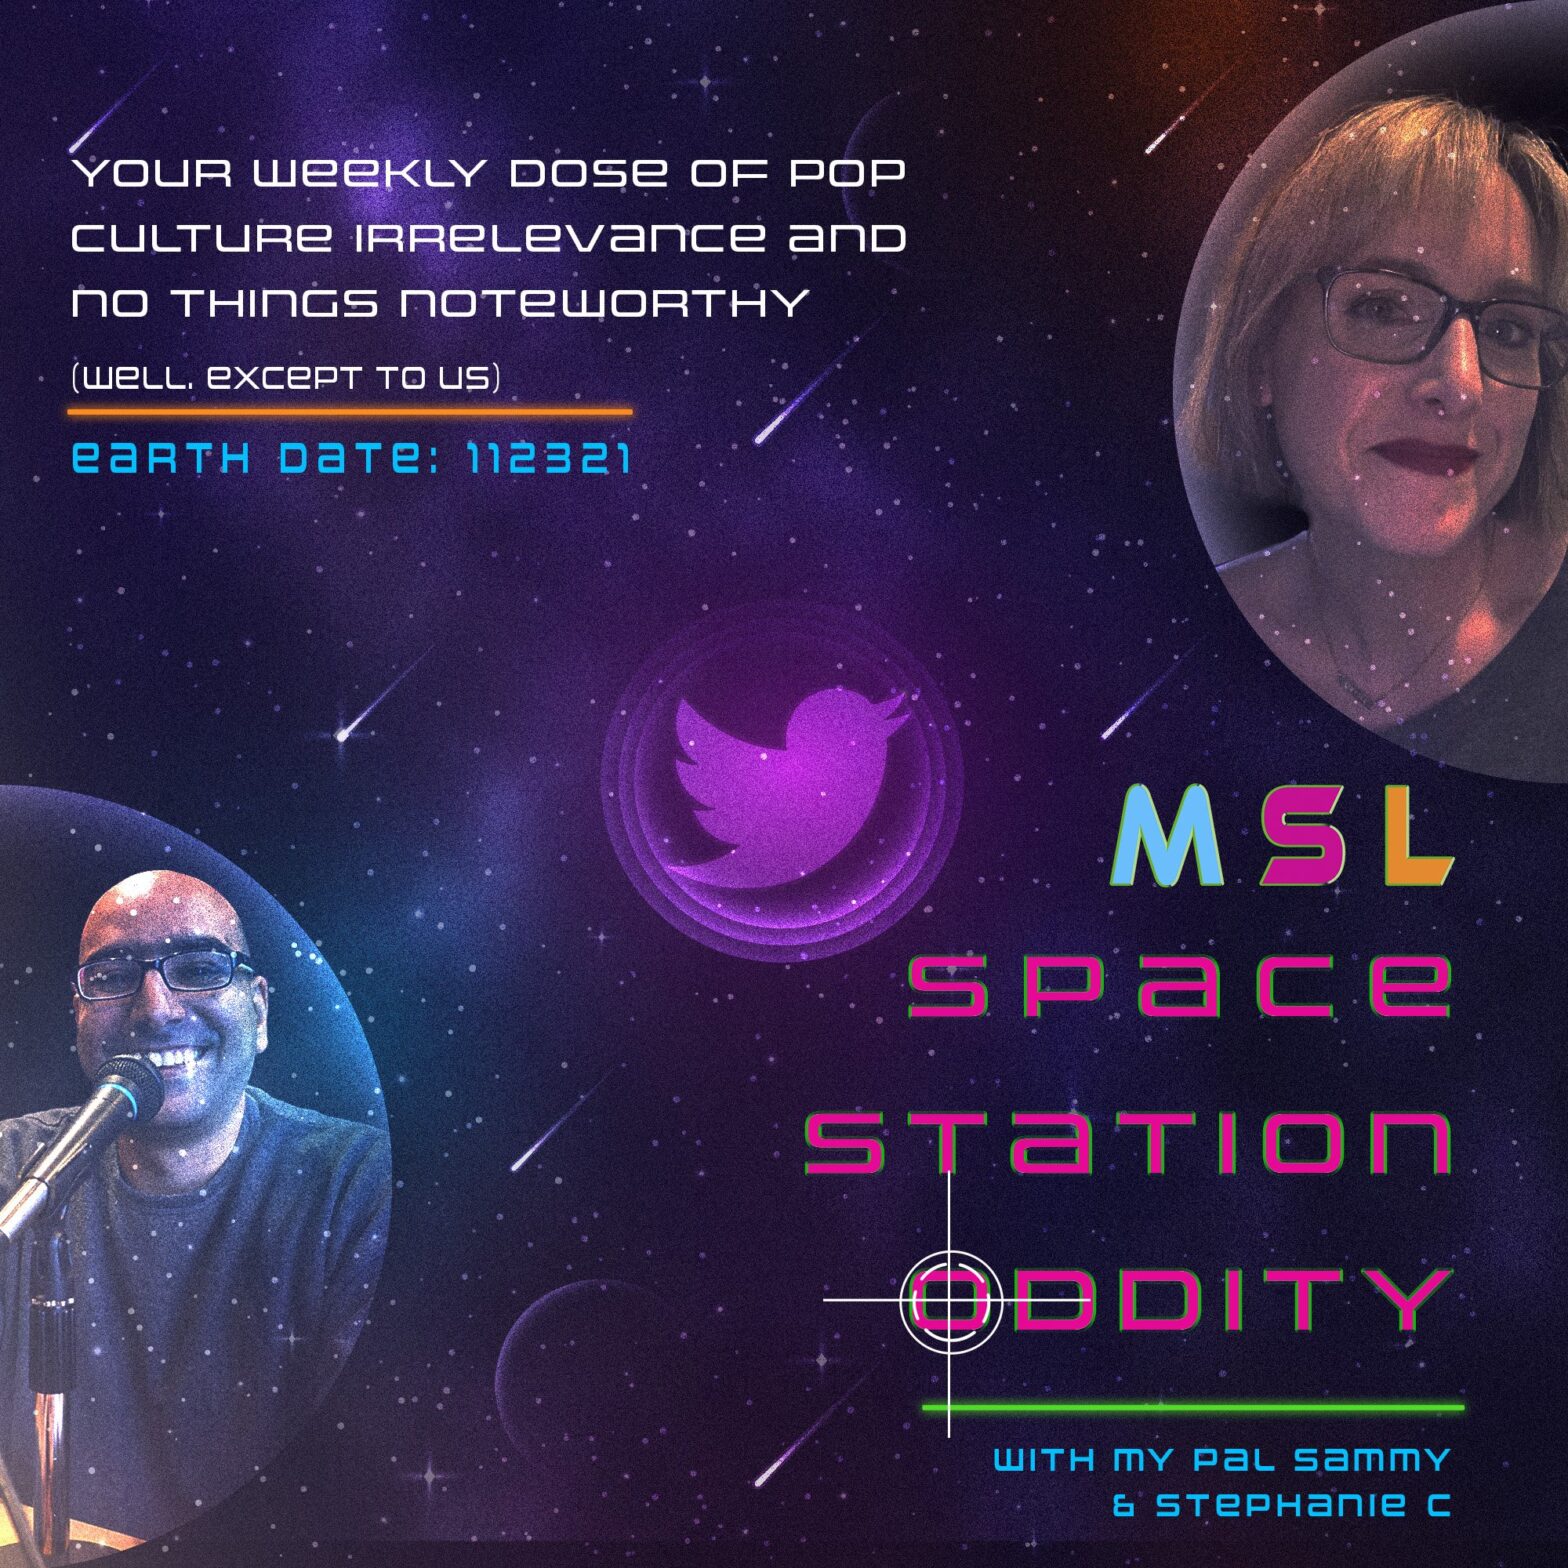 MSL Space Station Oddity: 2021 Induction Ceremony | Rock & Roll Hall of Fame